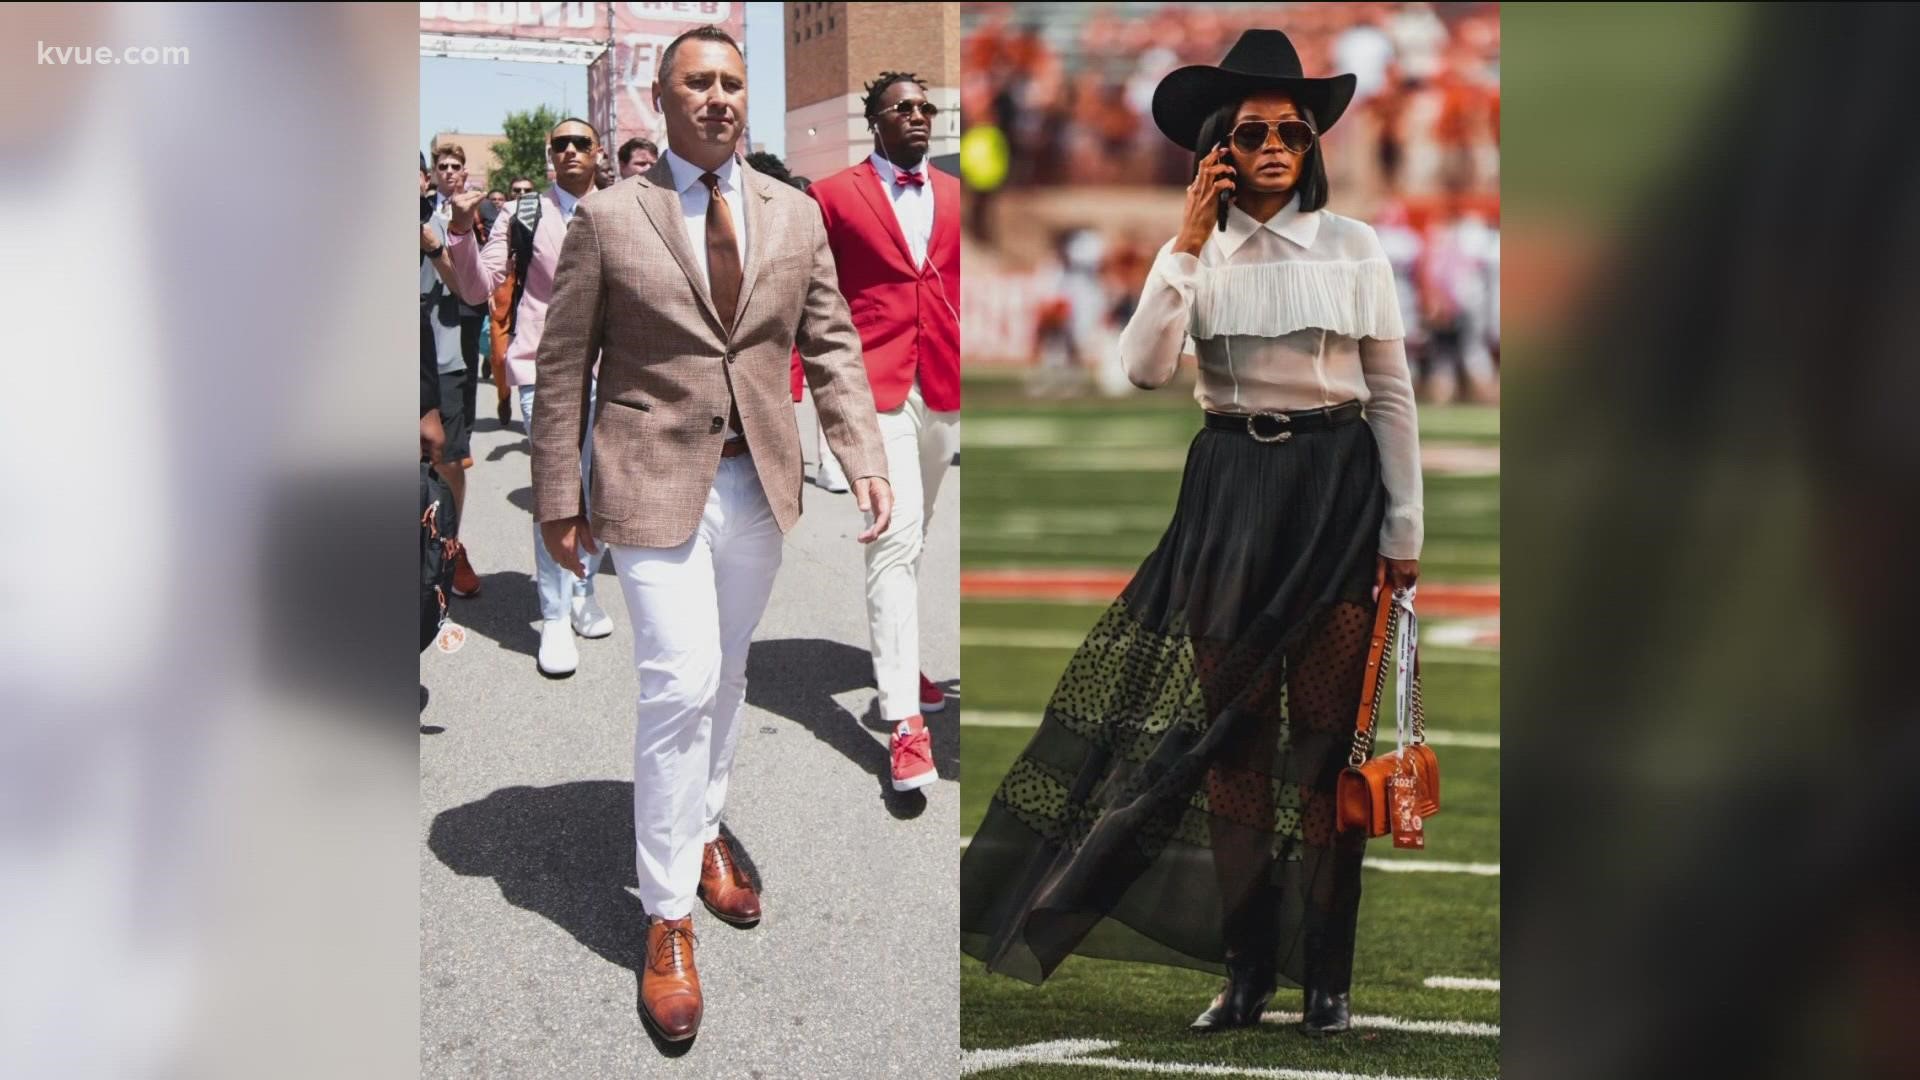 UT head coach Steve Sarkisian and his wife, Loreal Sarkisian, were dressed to the nines on Saturday's home opener.